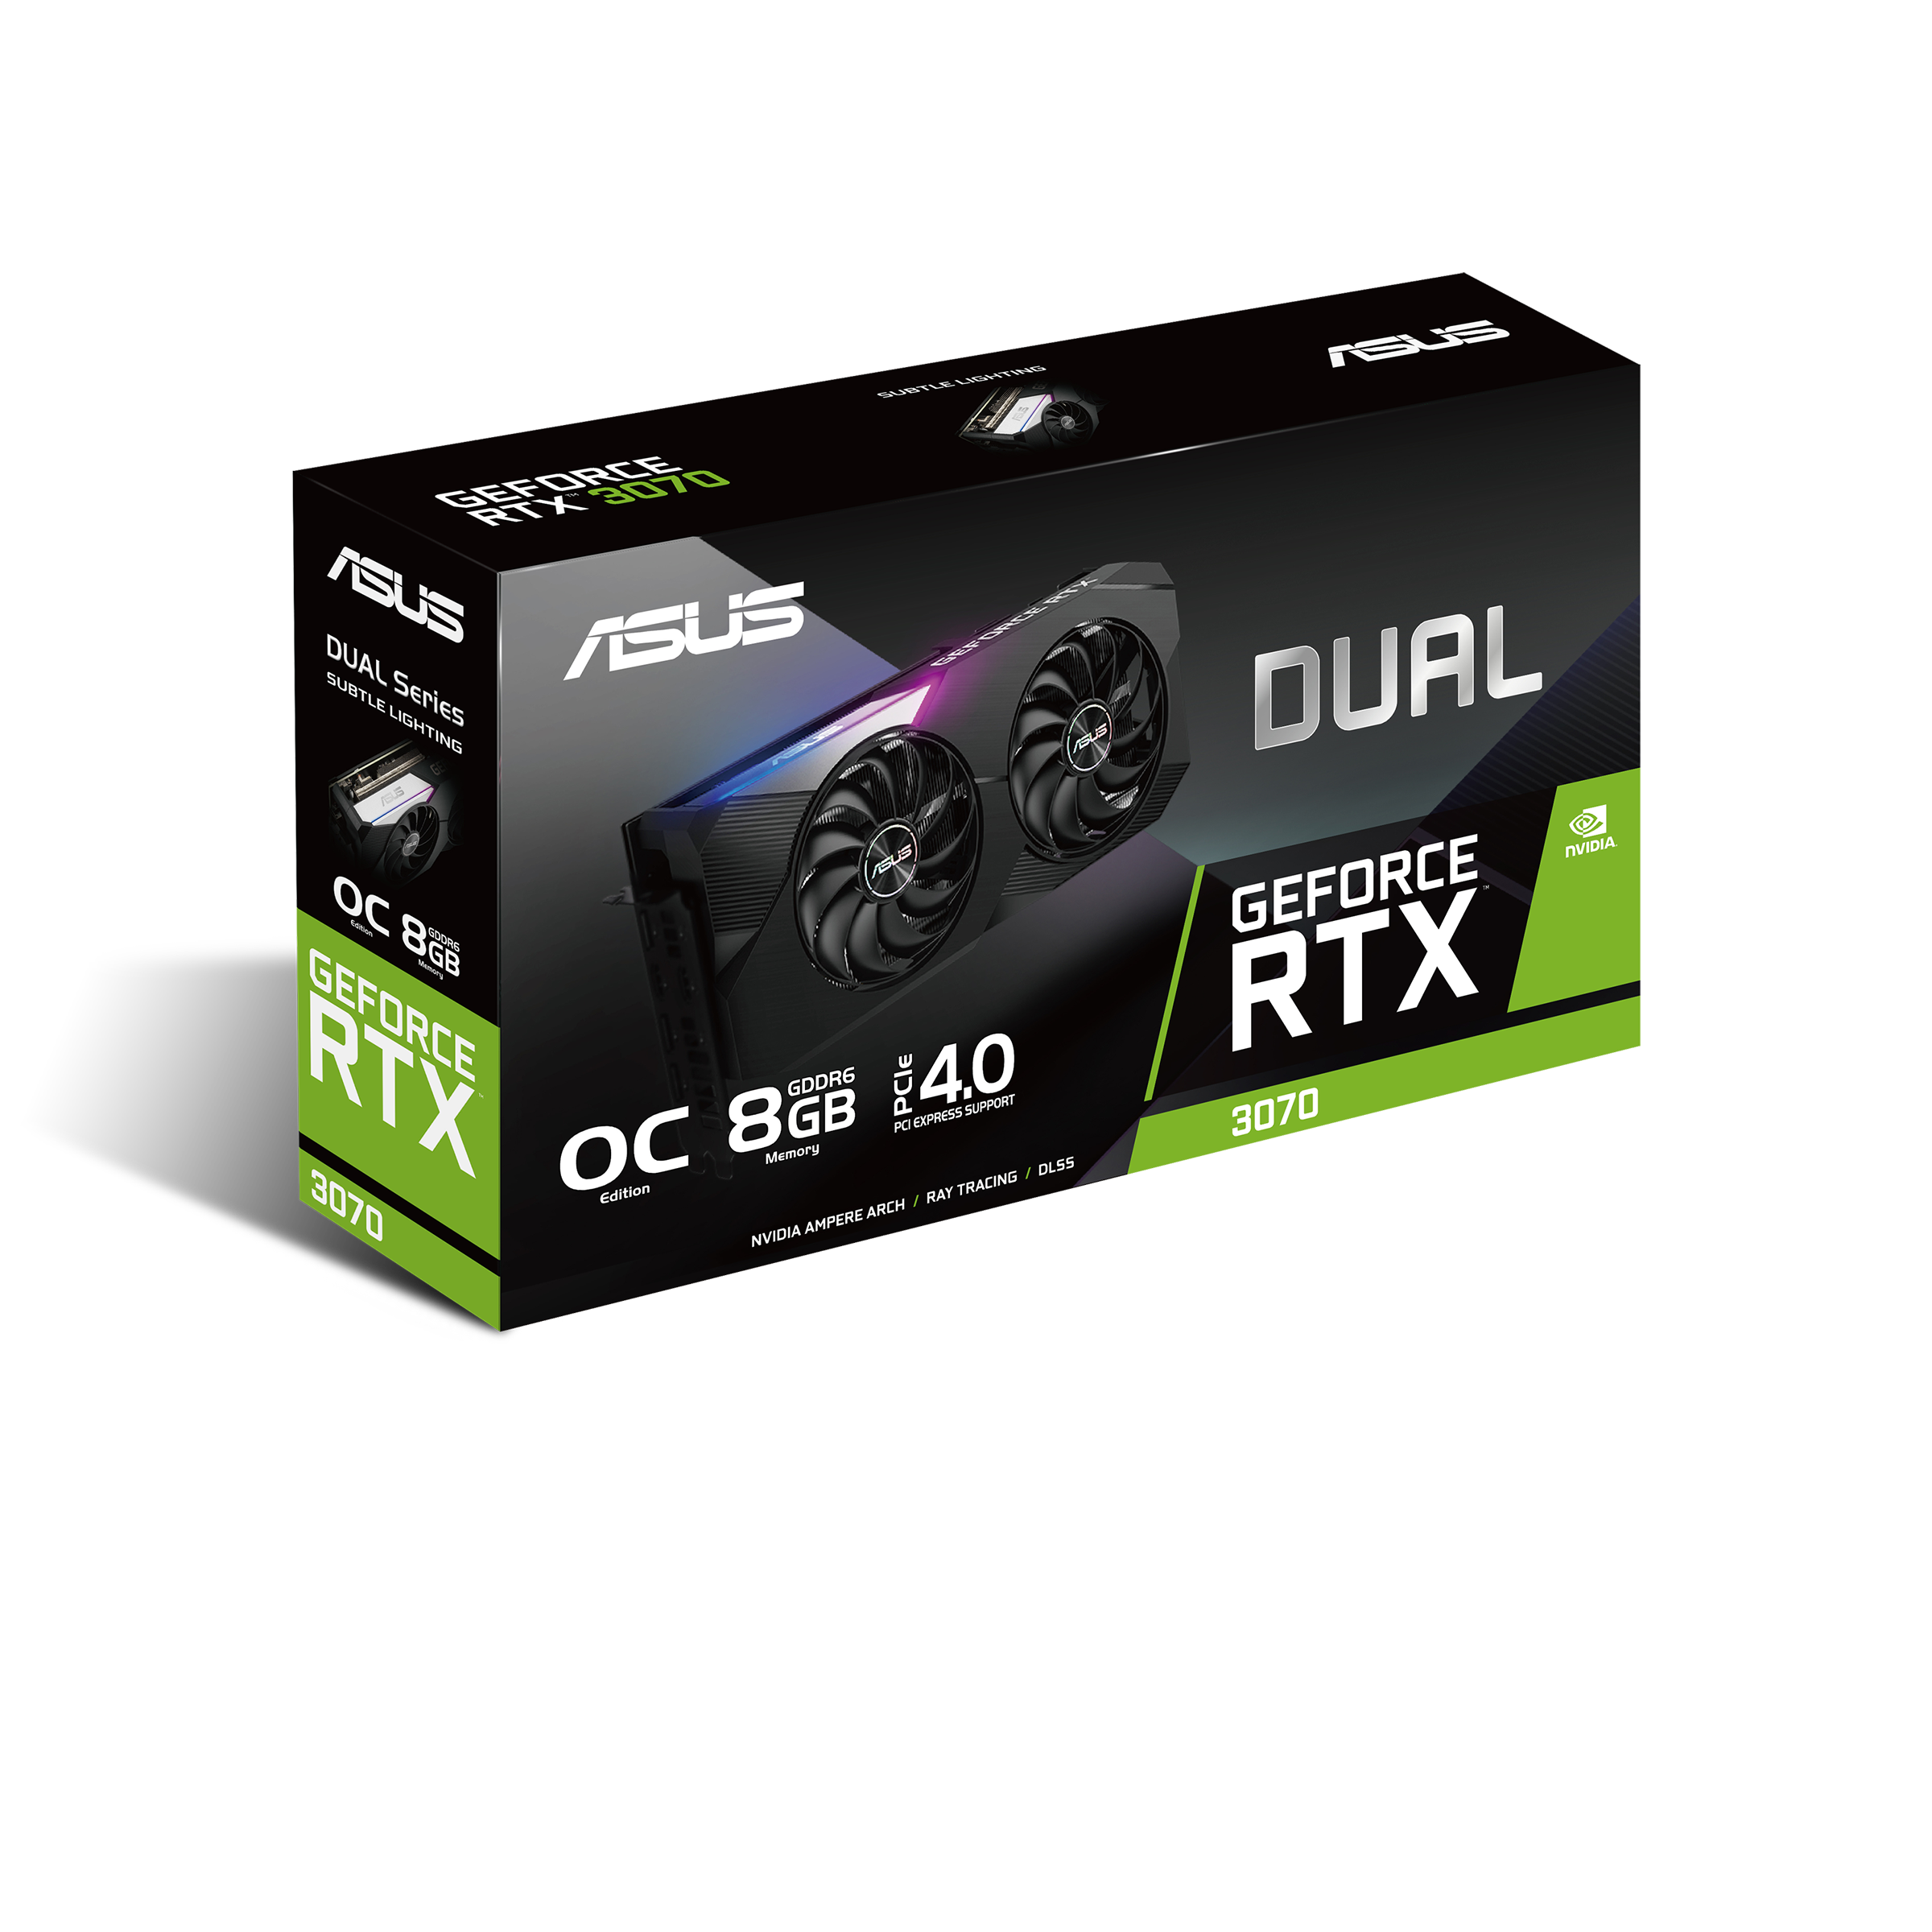 DUAL-RTX3070-O8G｜Graphics Cards｜ASUS Switzerland